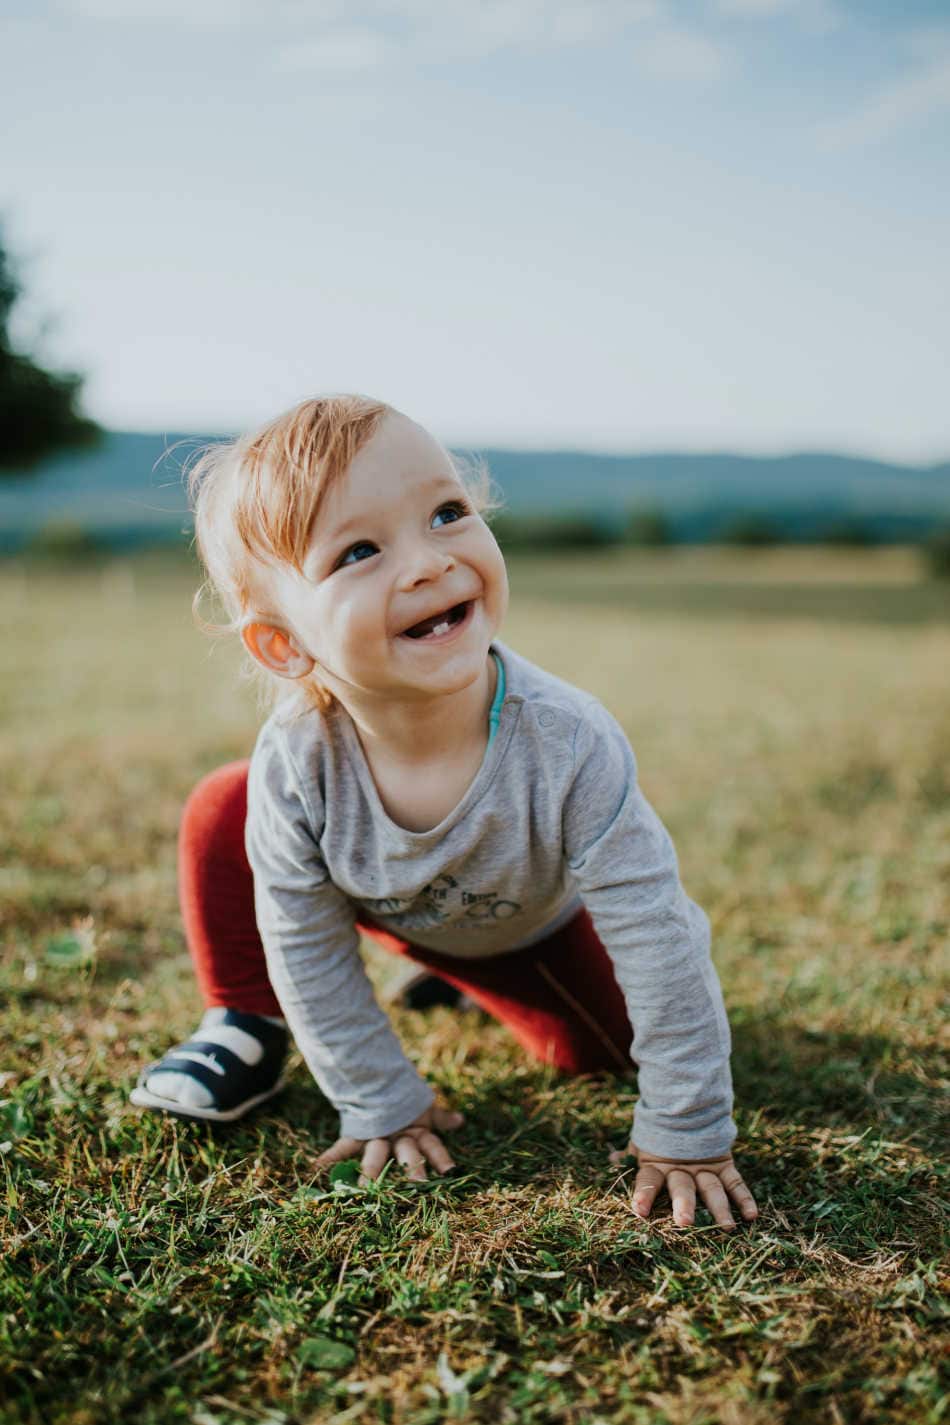 An Herbal Teething Remedy That Actually Works! | Growing Up Herbal | Having a teething baby is no fun, especially when all the go-to relief products don't work. Thankfully, there's an herbal teething remedy that works!